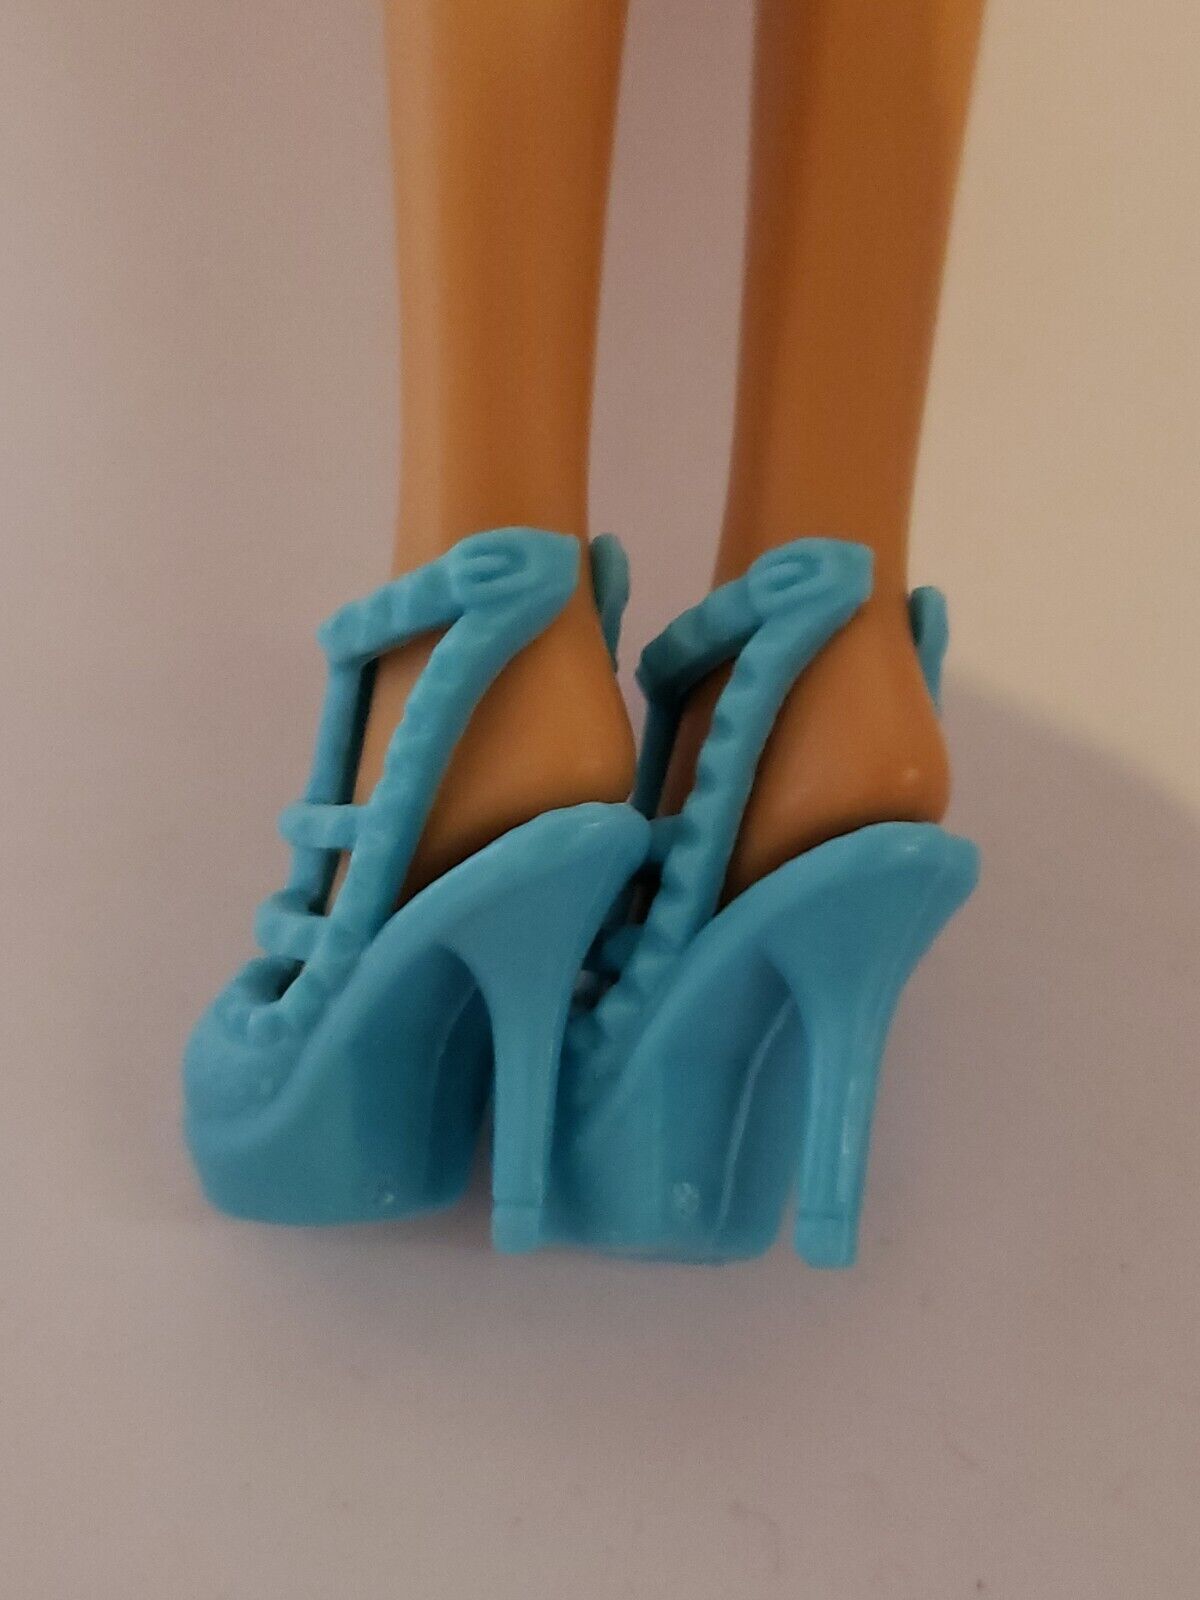 TURQUOISE COLORED HIGH HEEL STILETTO SHOES for Barbie